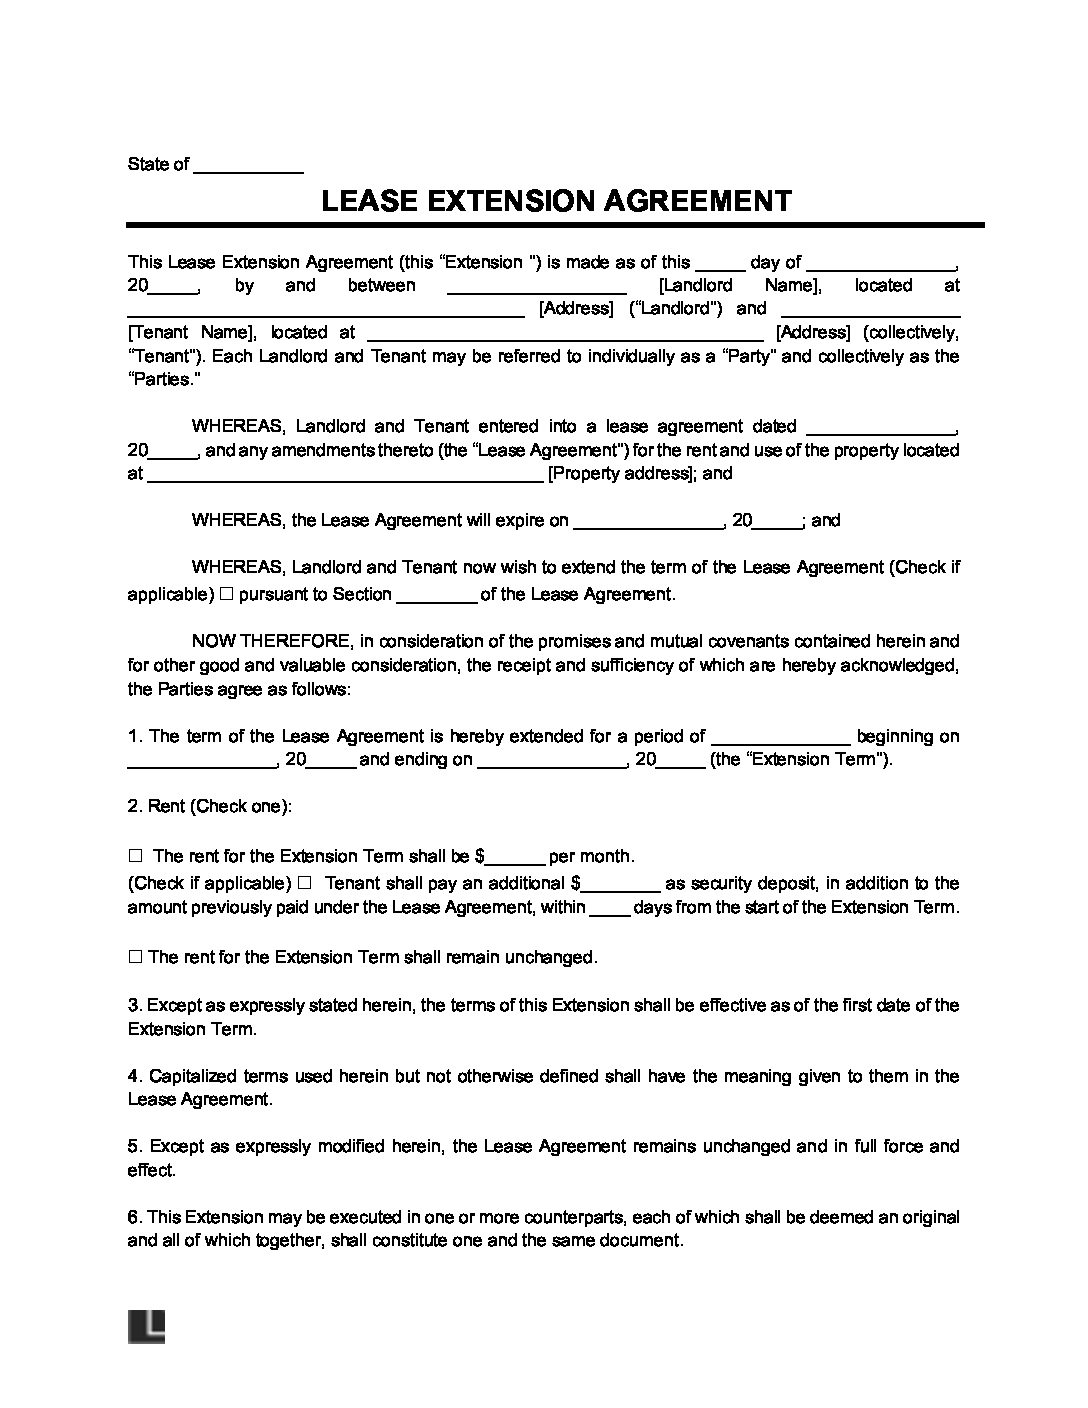 assignment of lease extension rights